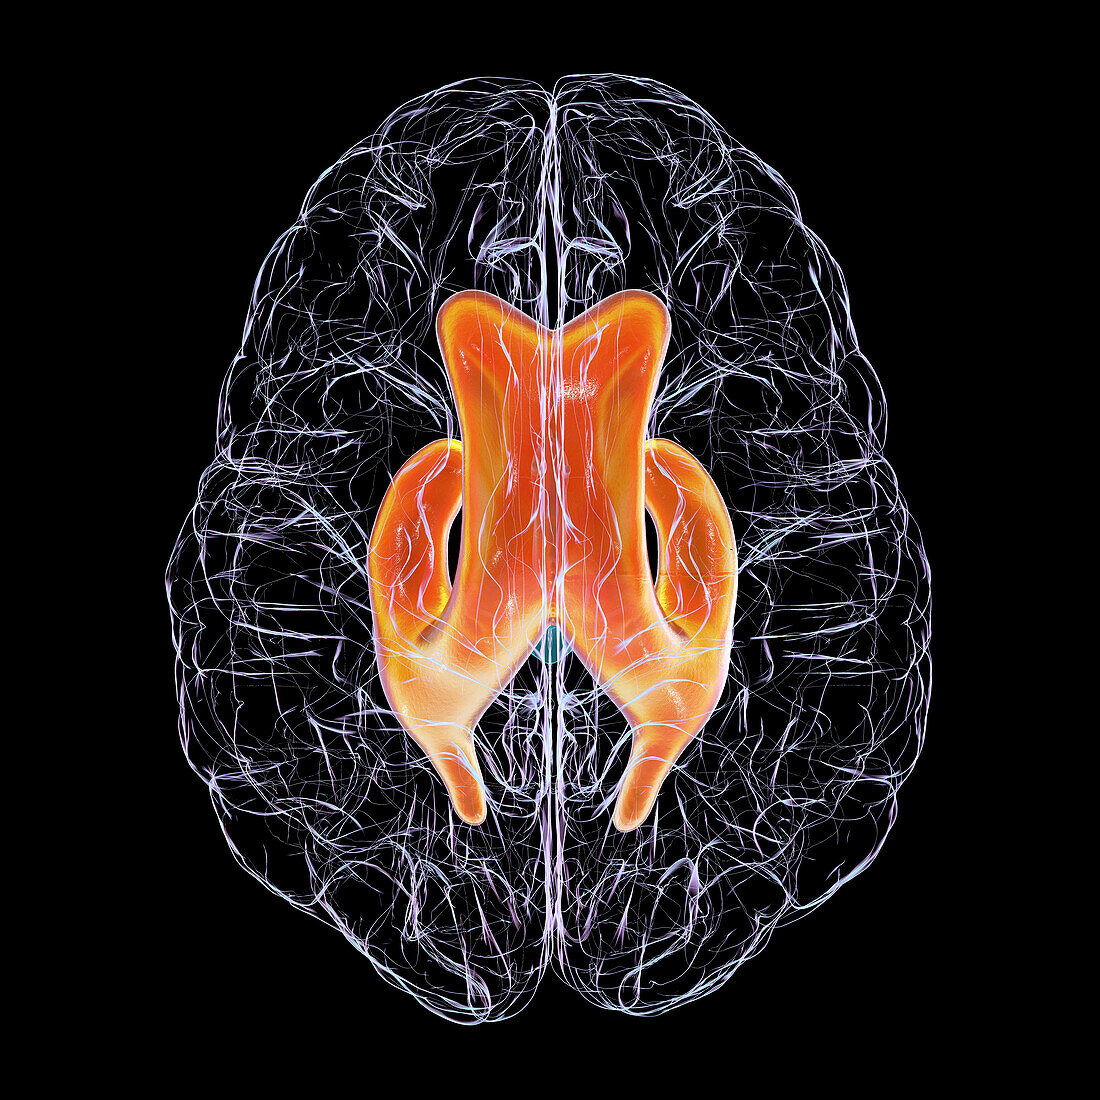 Enlarged lateral ventricles of the brain, illustration